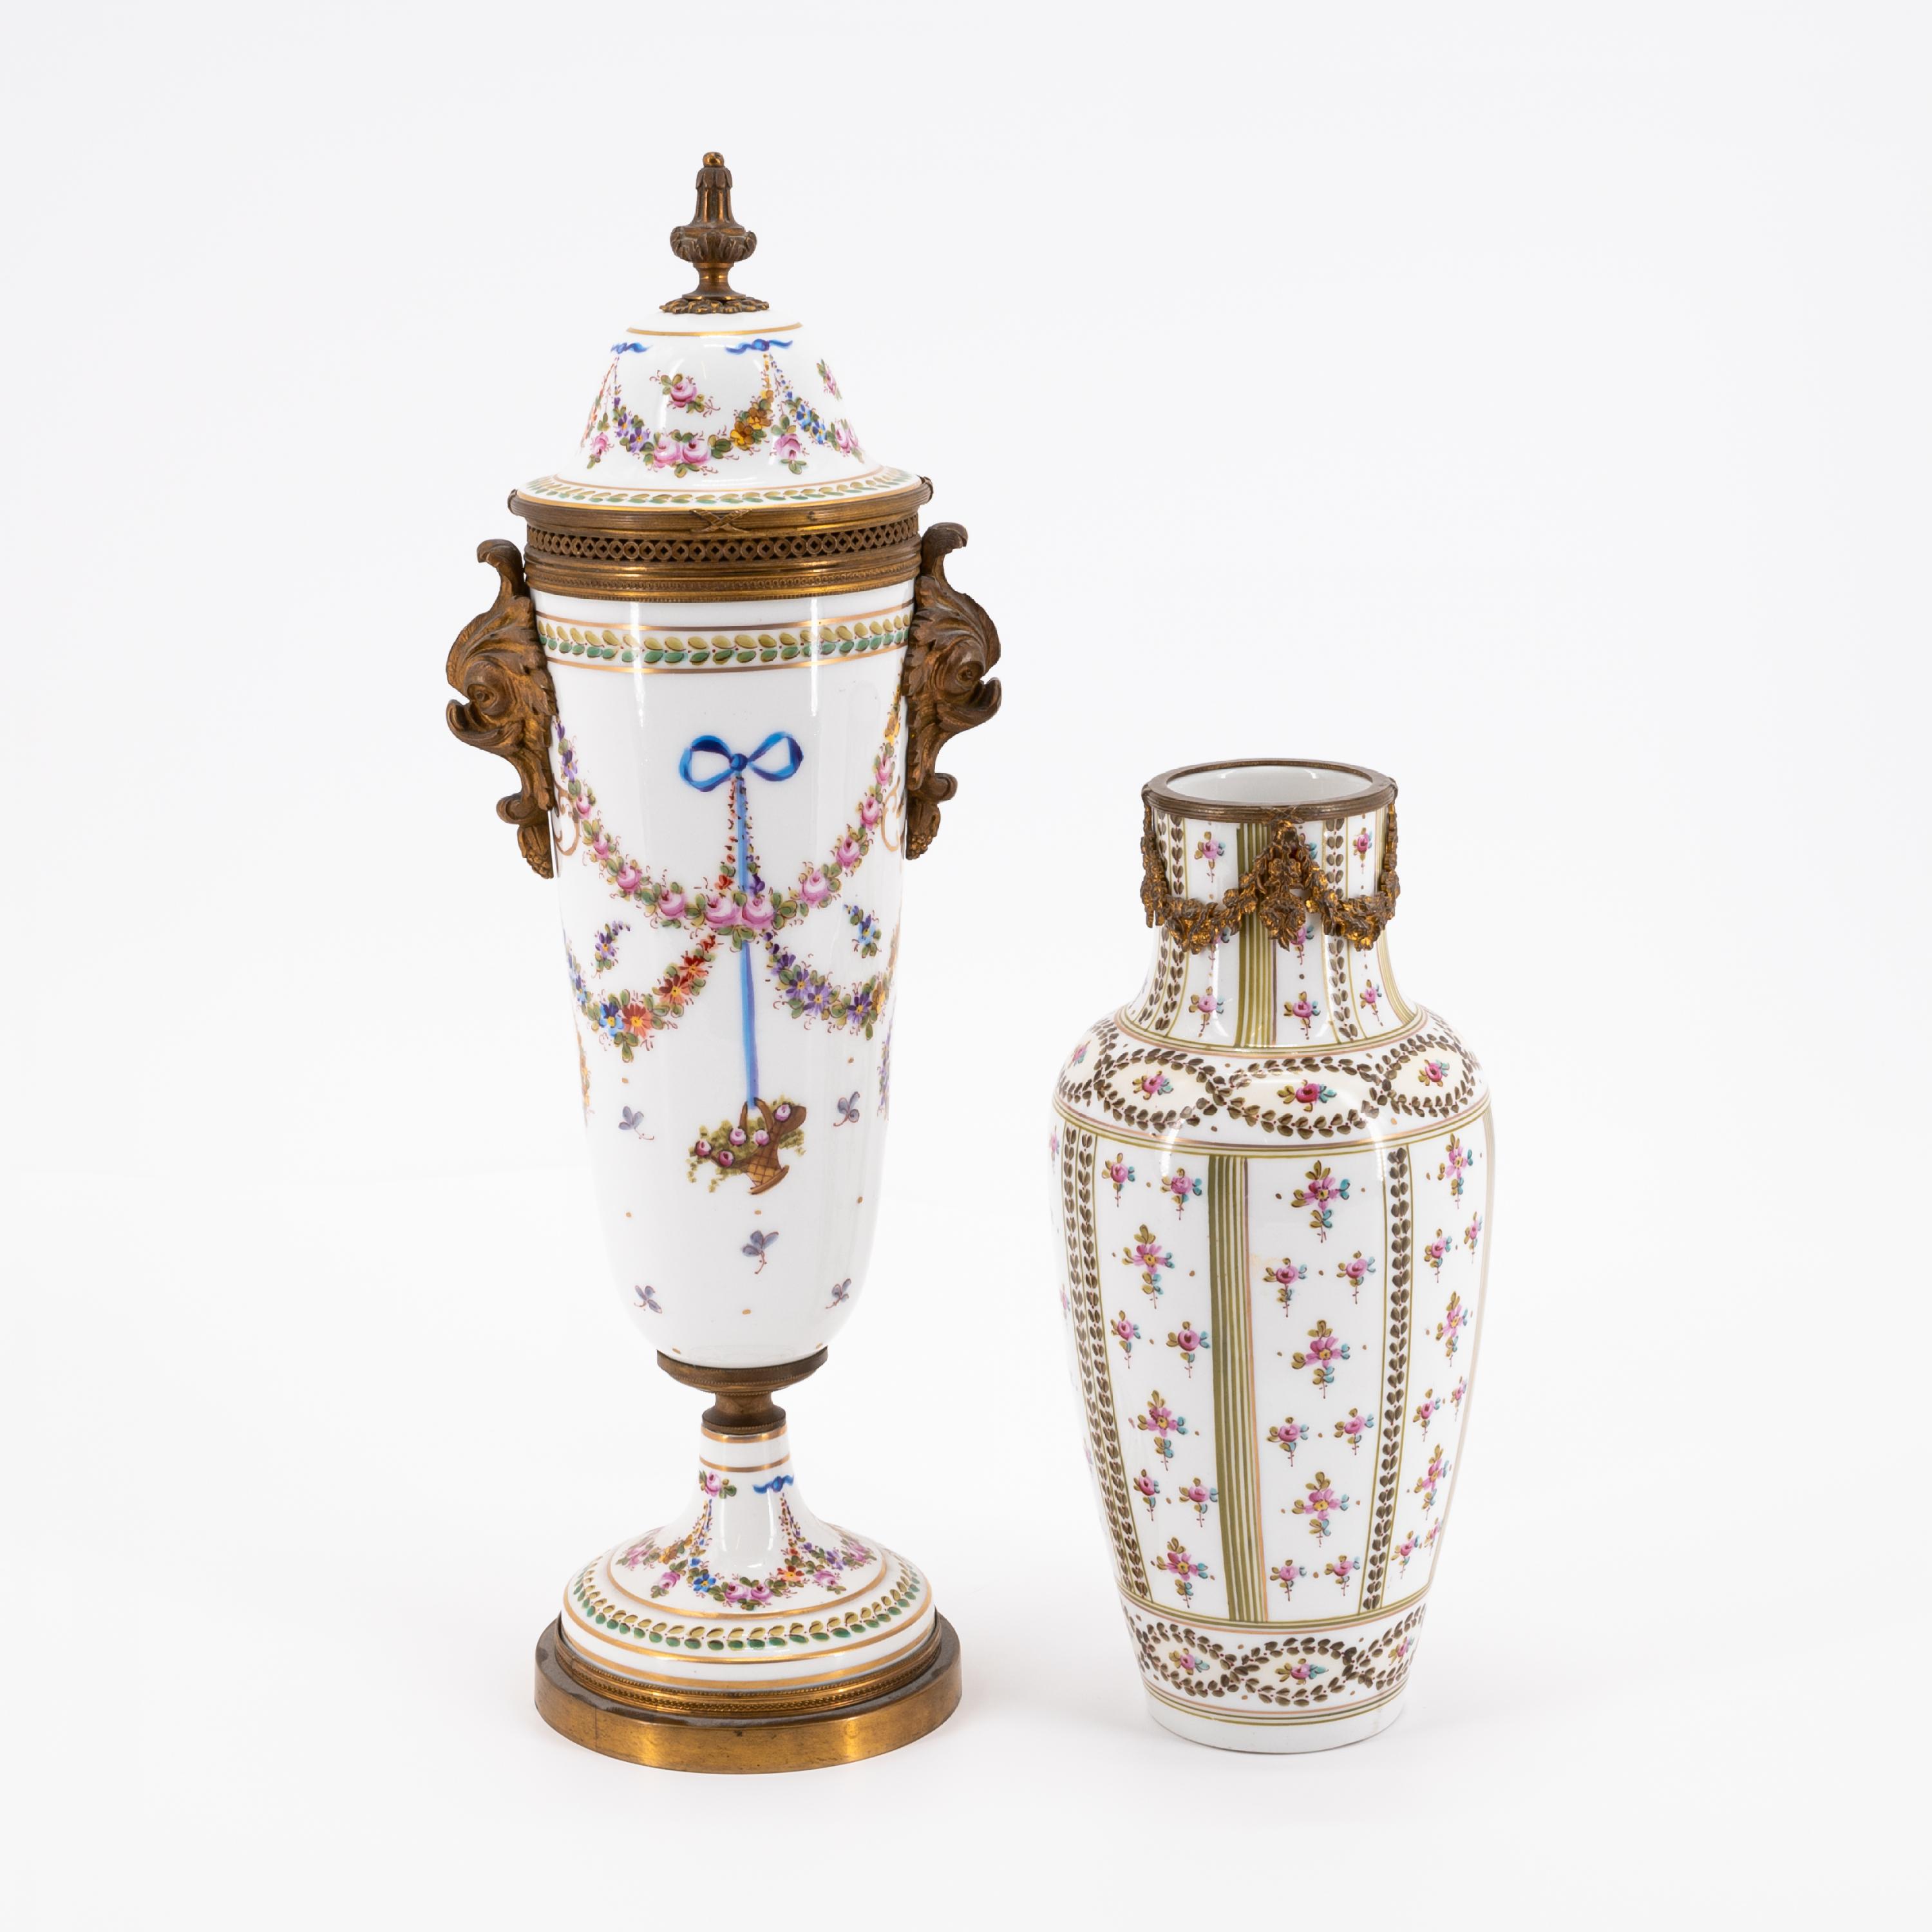 TWO SMALL PORCELAIN VASES WITH FLOWER GARLANDS AND SMALL BLOSSOMS - Image 3 of 6